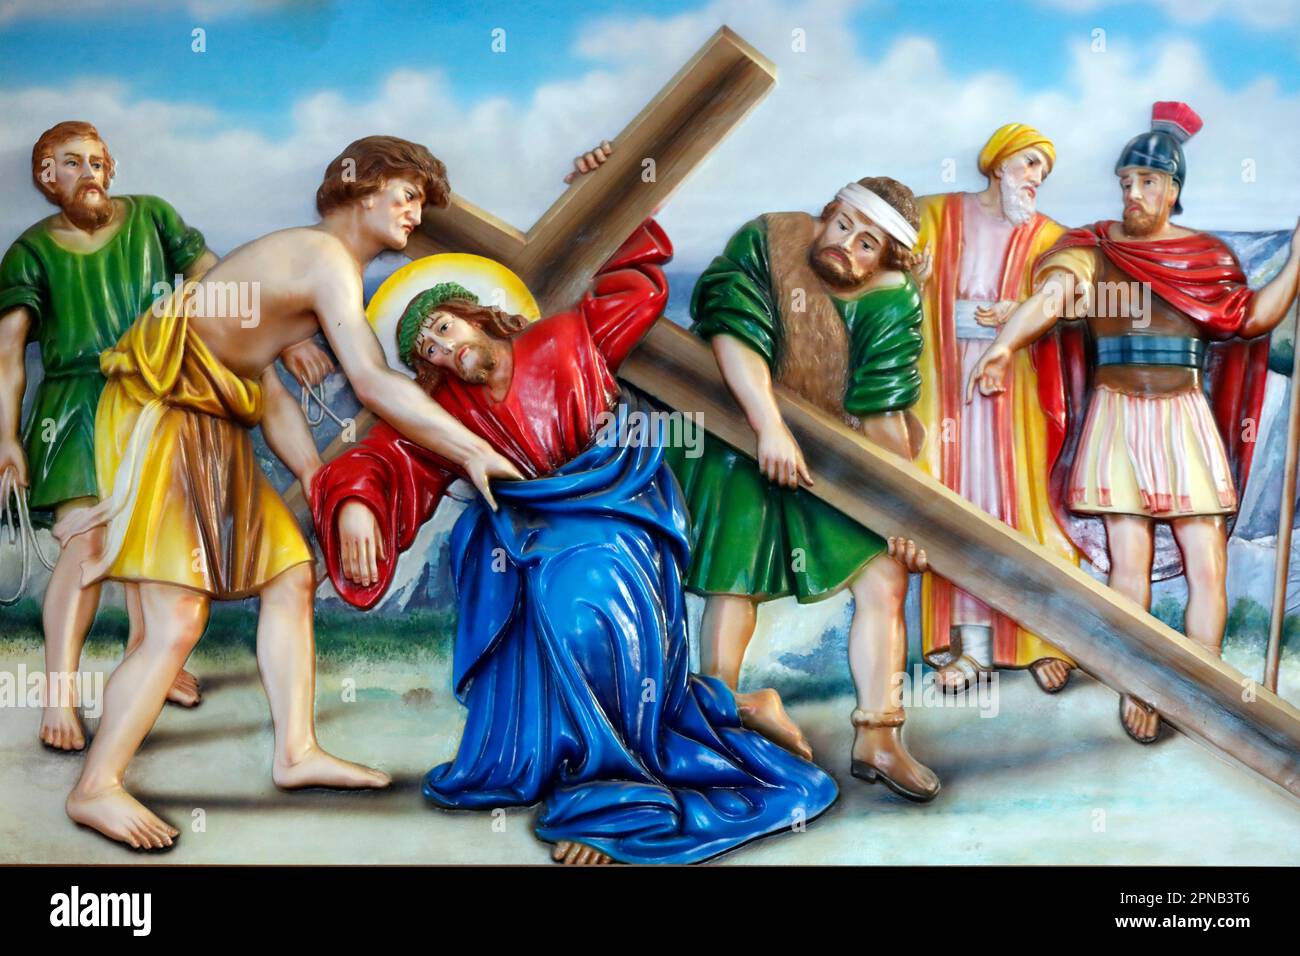 Fatima church.  Passion of Christ. Way of the cross. 5th Station: Simon of Cyrene helps Jesus to carry his cross. Ho Chi Minh City. Vietnam. Stock Photo